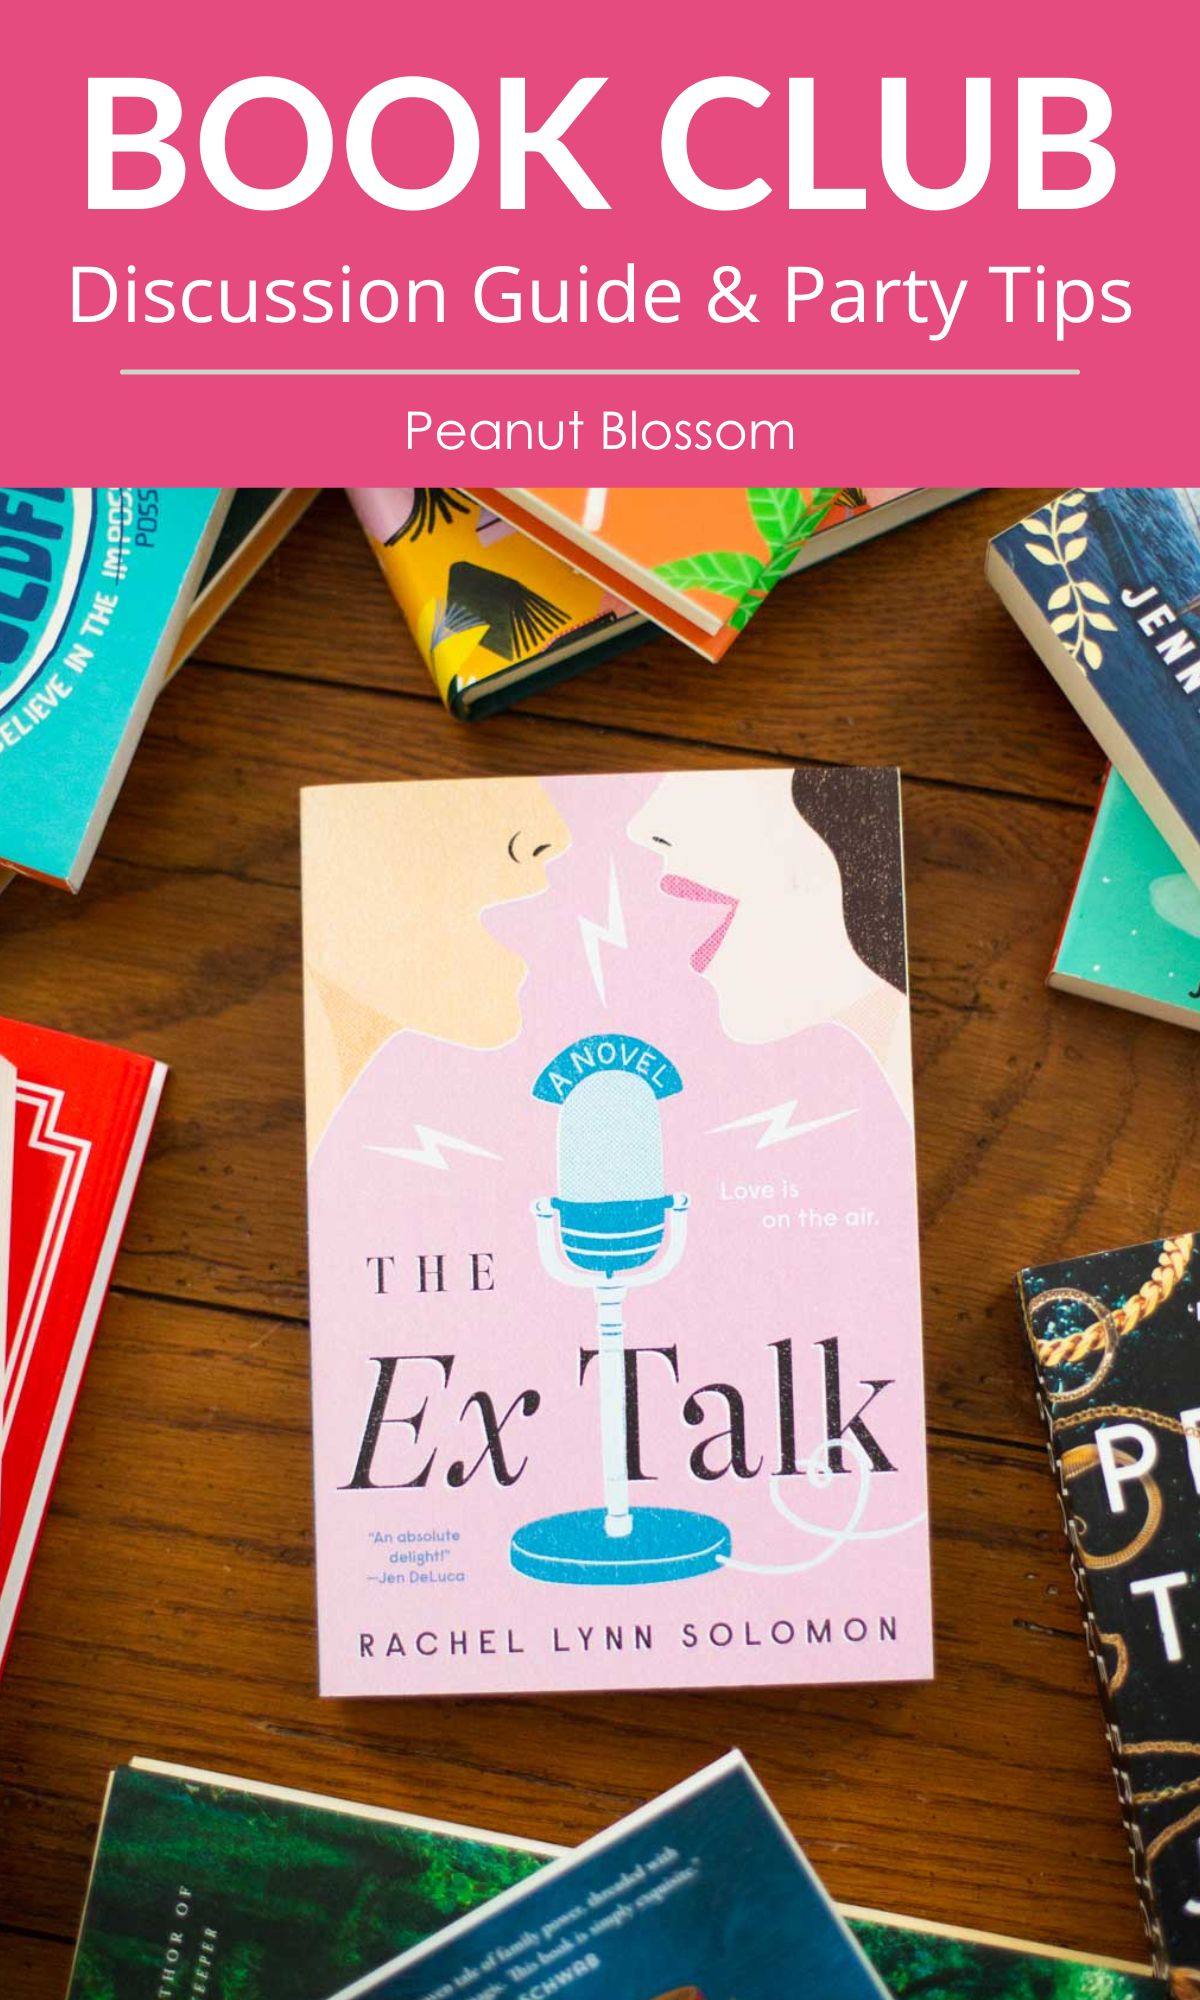 A copy of the book The Ex Talk sits on the table.